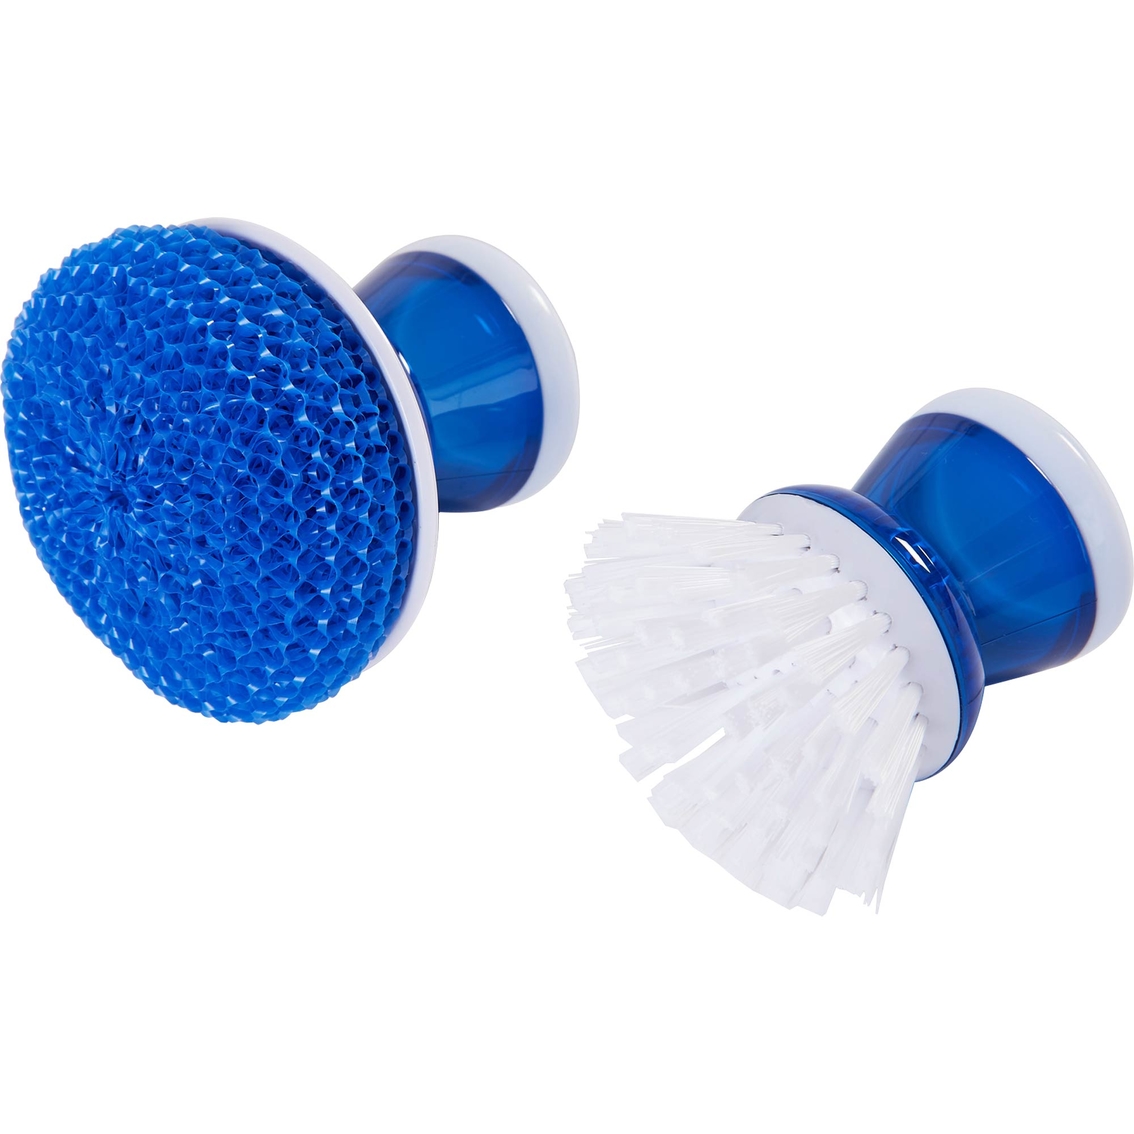 Farberware Scrubby and Scourer Set - Image 2 of 2